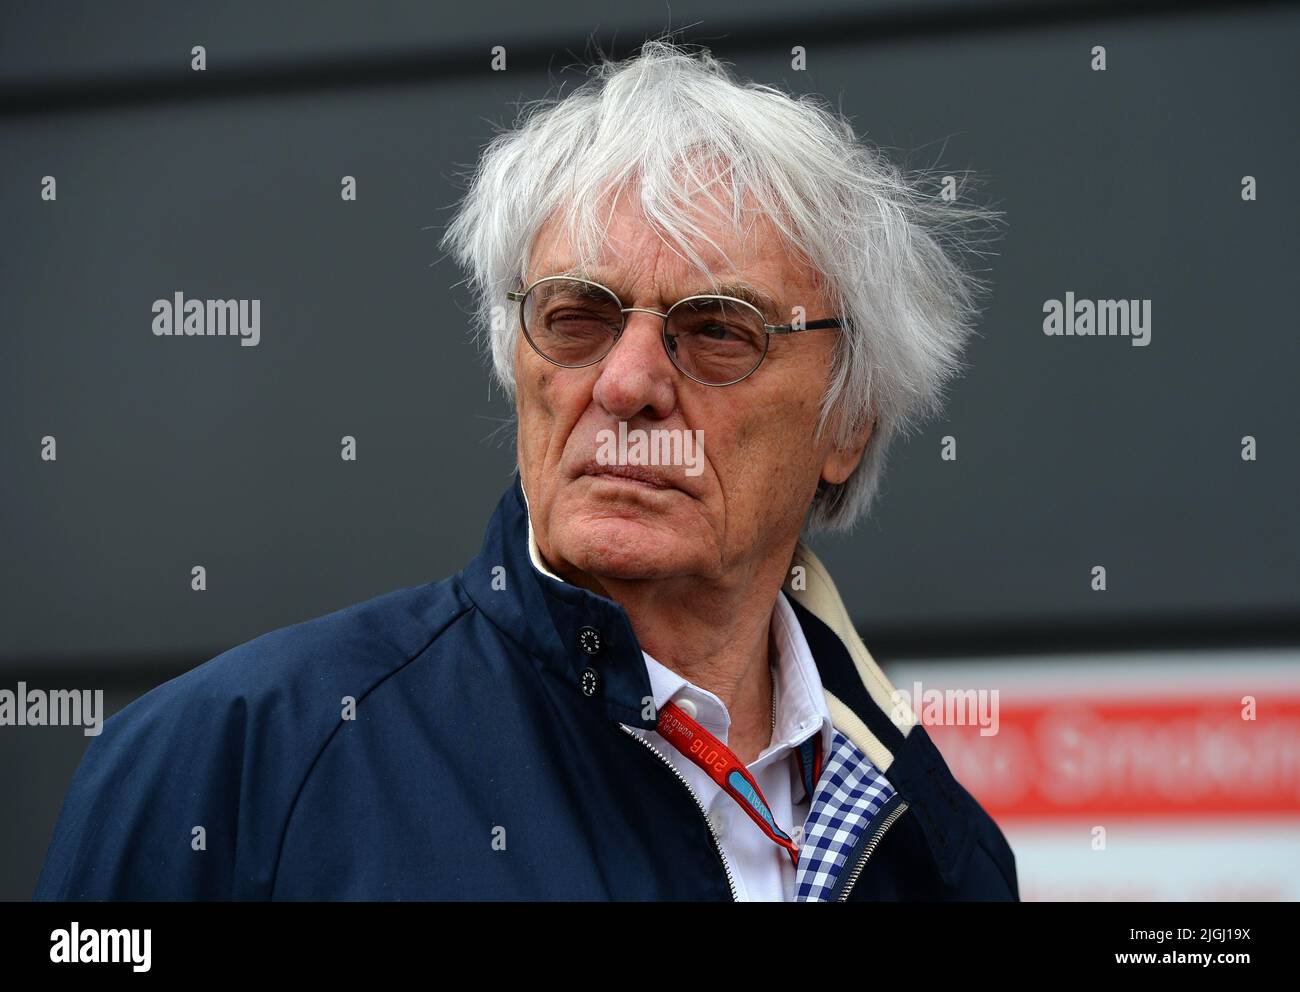 File photo dated 09/07/16 of Bernie Ecclestone during Qualifying for the 2016 British Grand Prix at Silverstone Circuit, Towcester. The former Formula One boss will be charged with fraud by false representation following an HMRC investigation into overseas assets believed to be worth more than £400 million, the Crown Prosecution Service said. Issue date: Monday July 11, 2022. Stock Photo